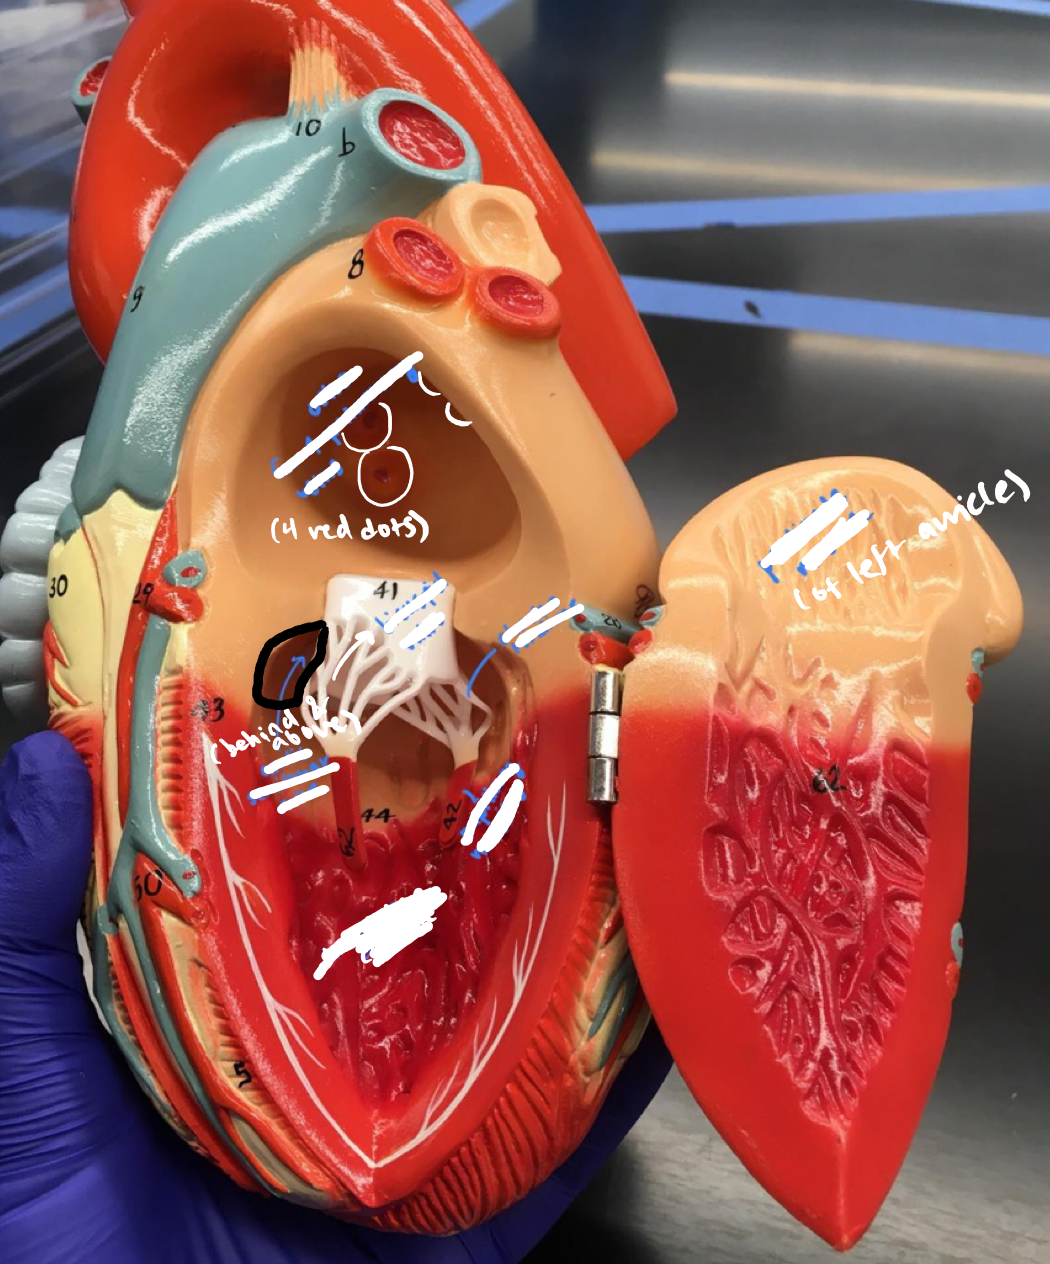 <p>The empty space behind and above the bicuspid valve</p>